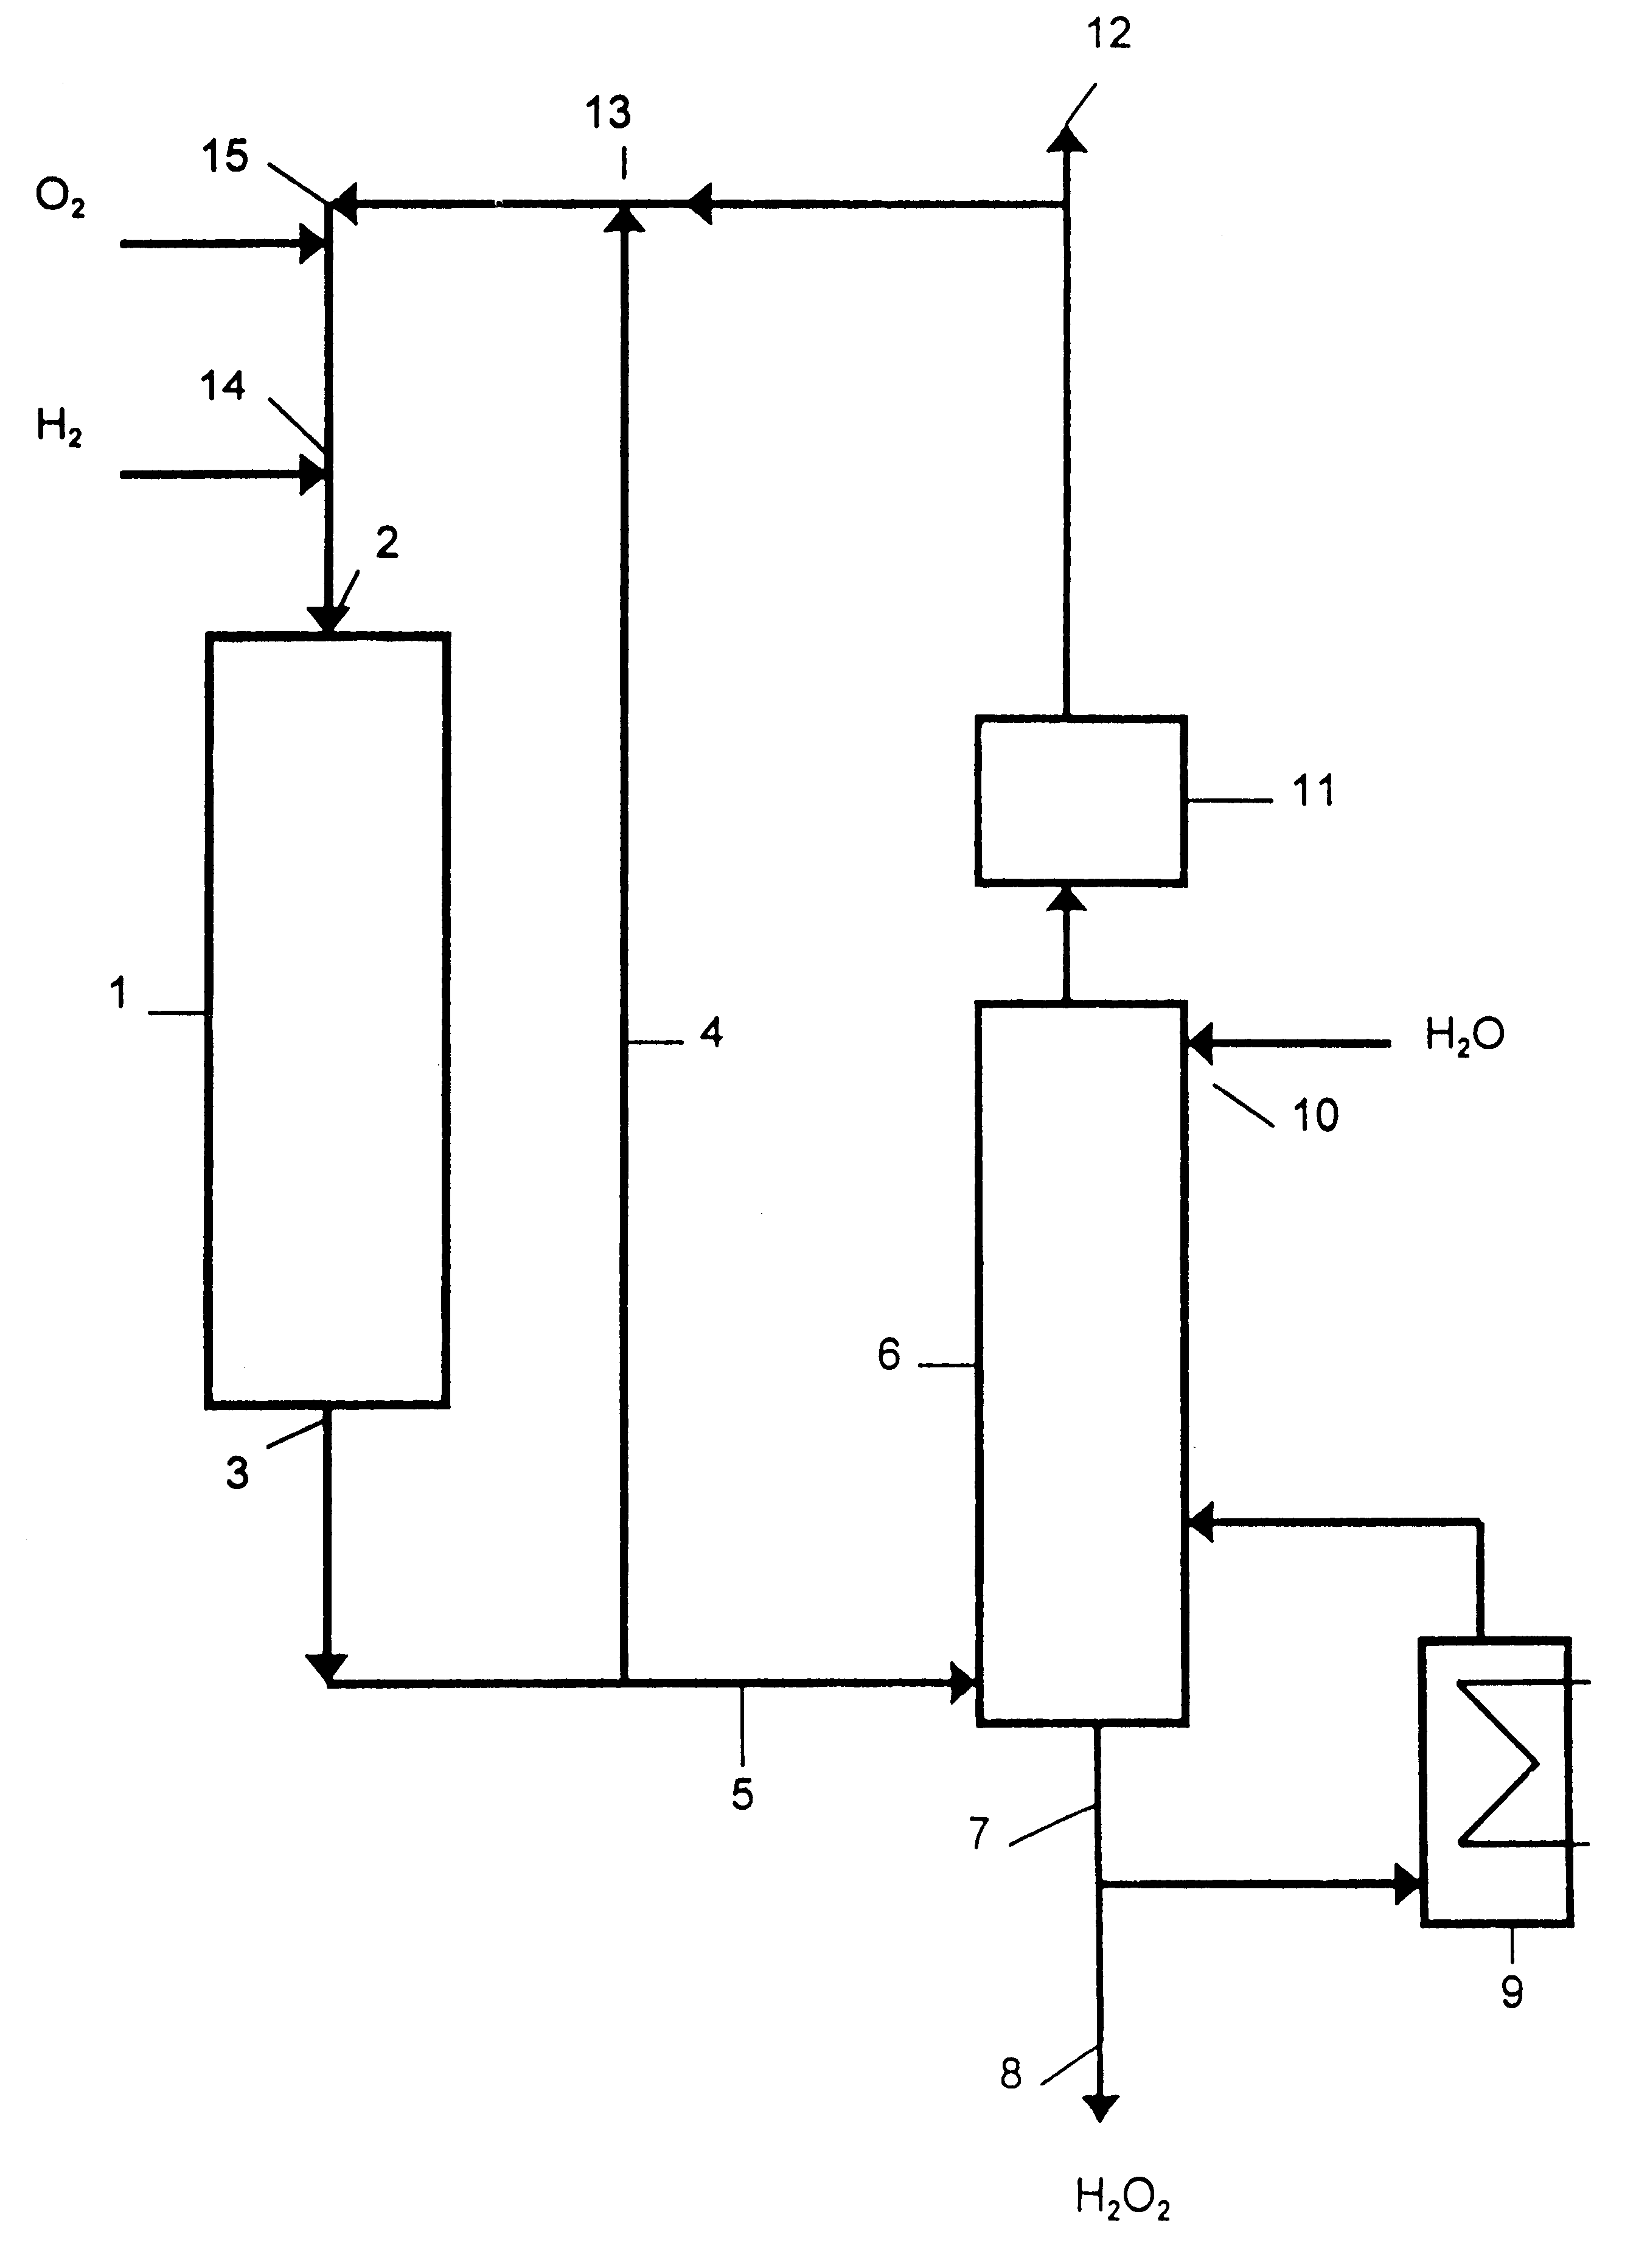 Process for producing hydrogen peroxide